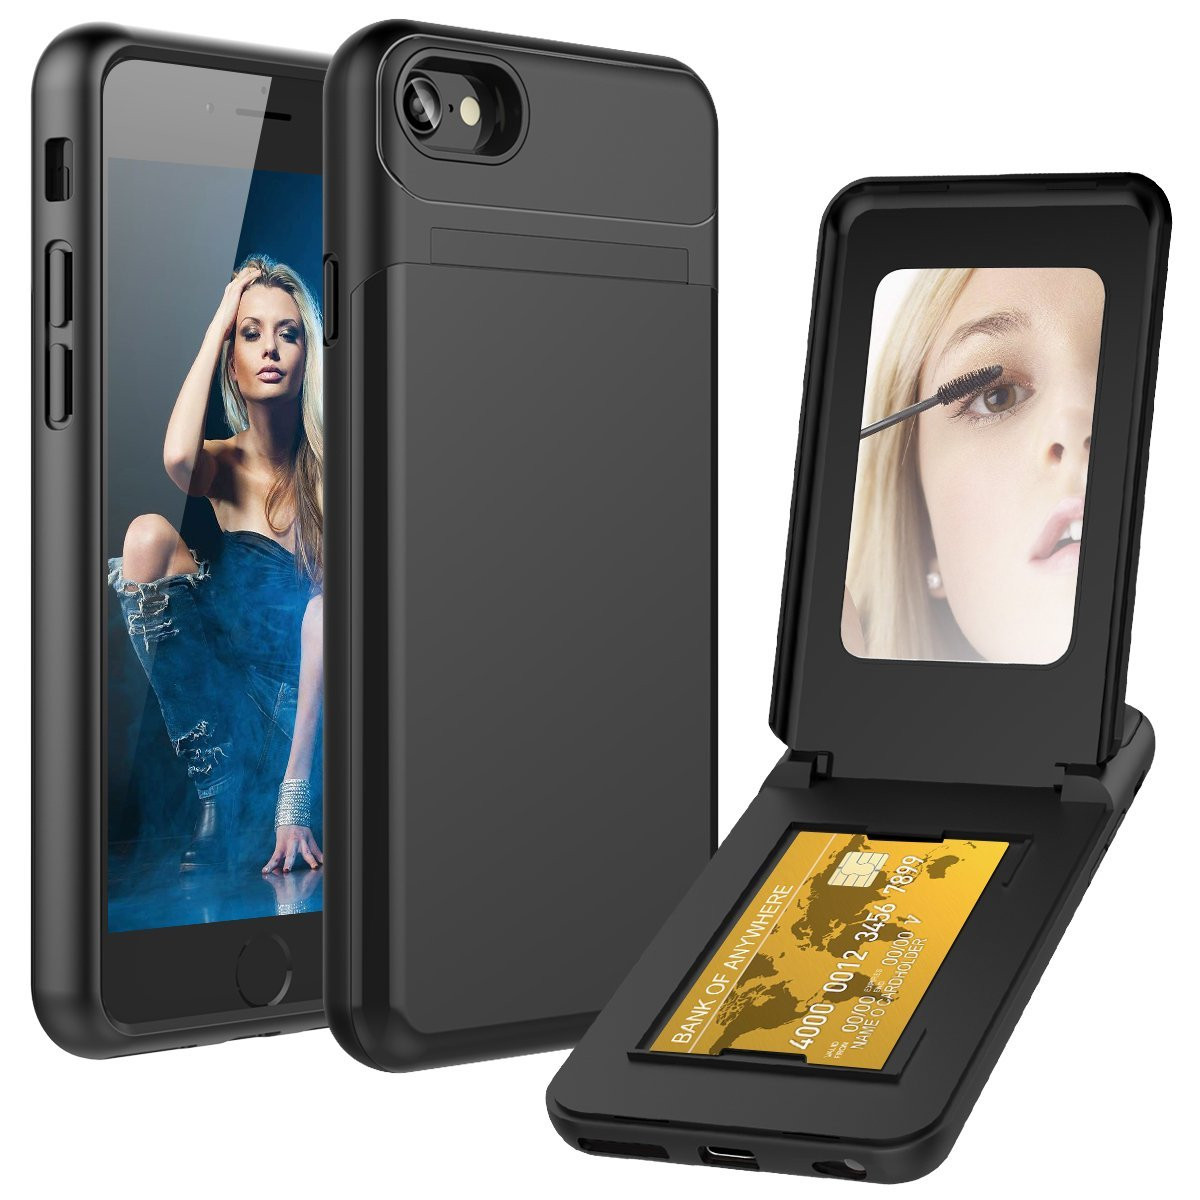 Apple iPhone 7 -  Hard Phone Case with Hidden Mirror and Card Holder Compartment, Black